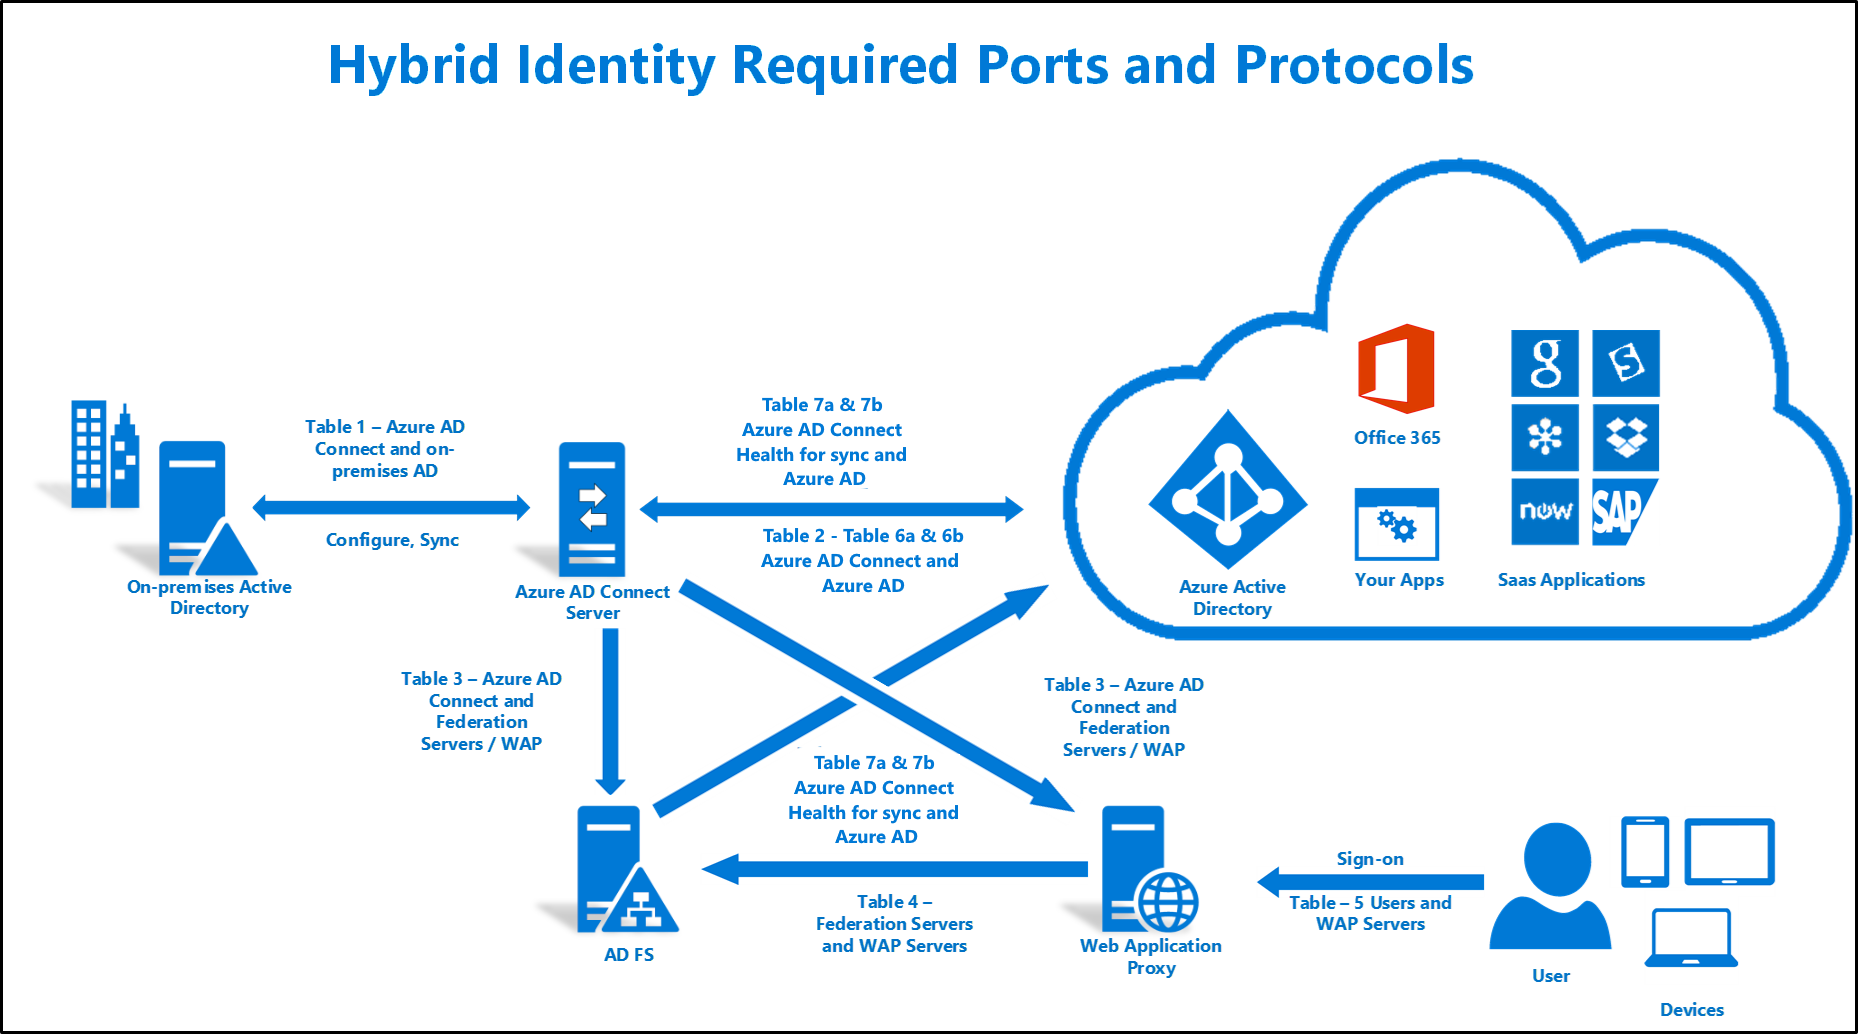 Hybrid Identity required ports and protocols - Azure | Microsoft Learn